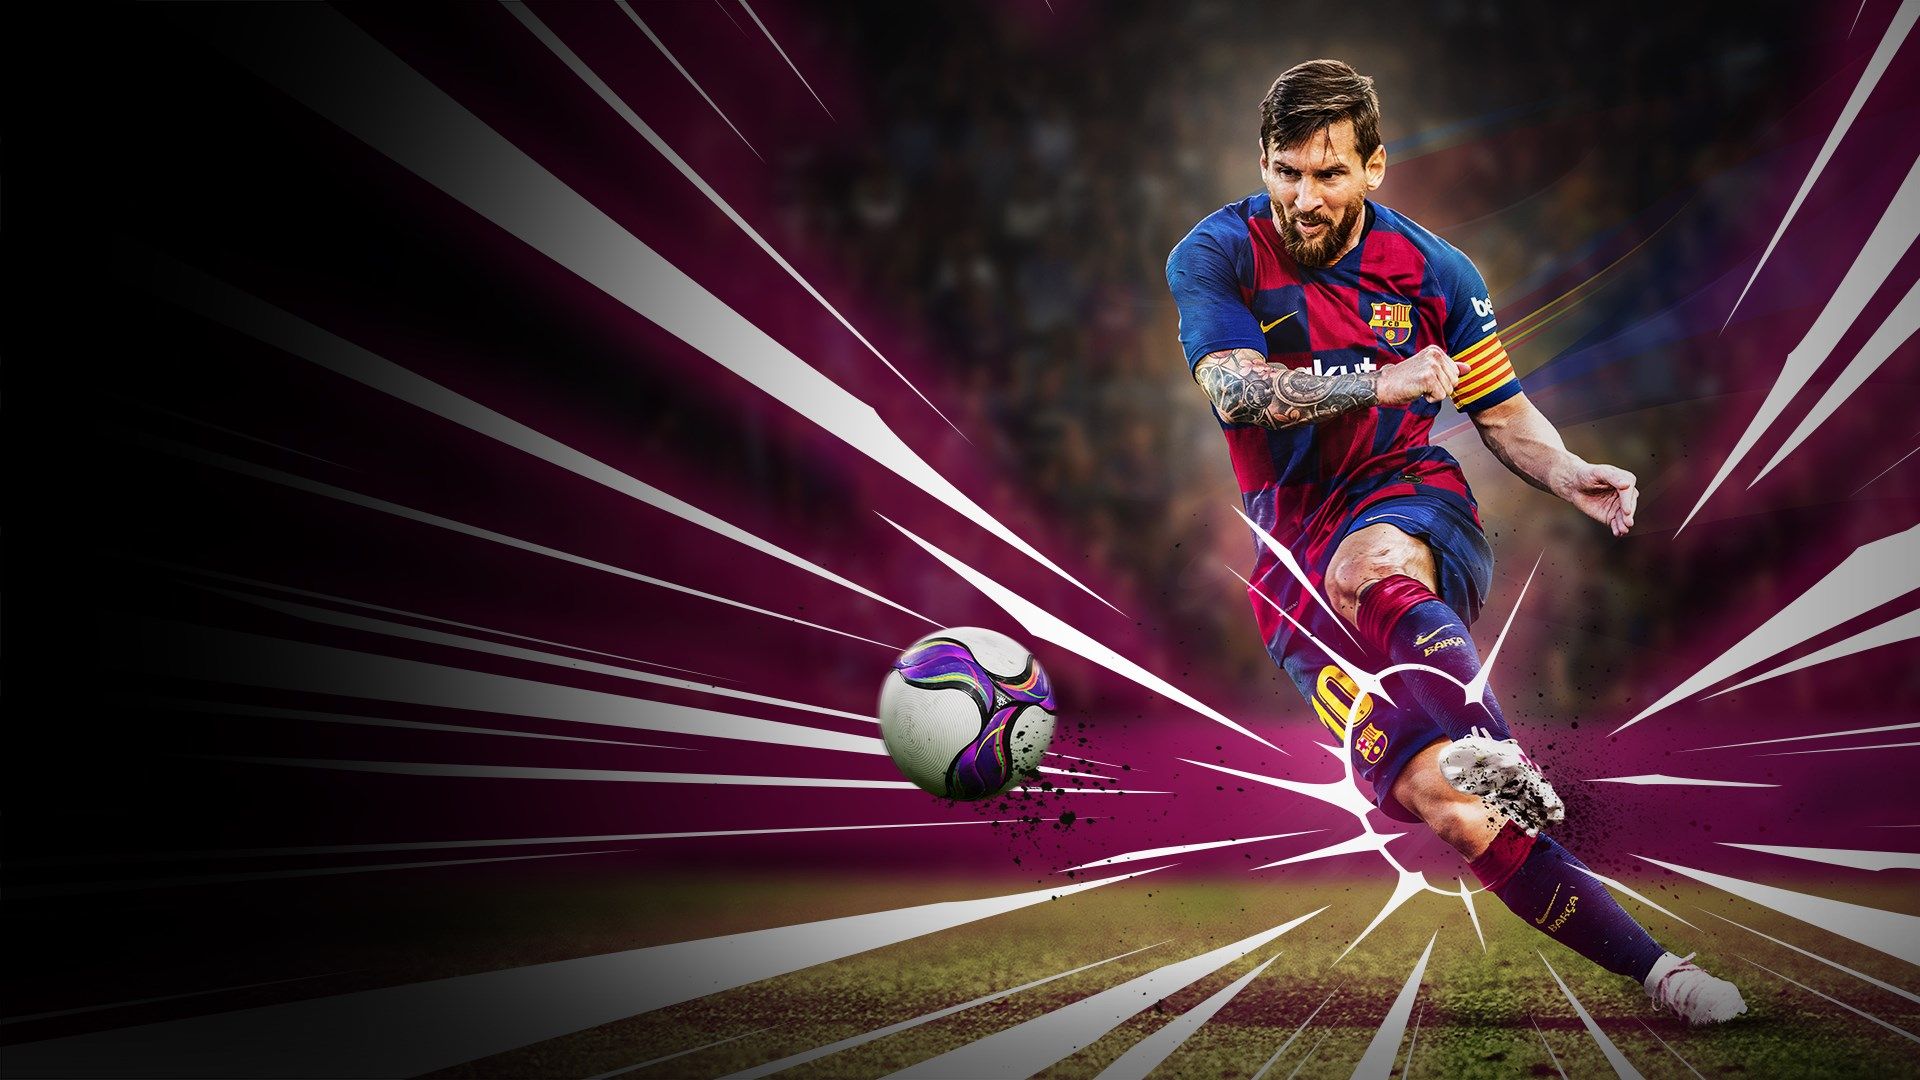 PES 2020 Wallpapers   Top Free PES 2020 Backgrounds